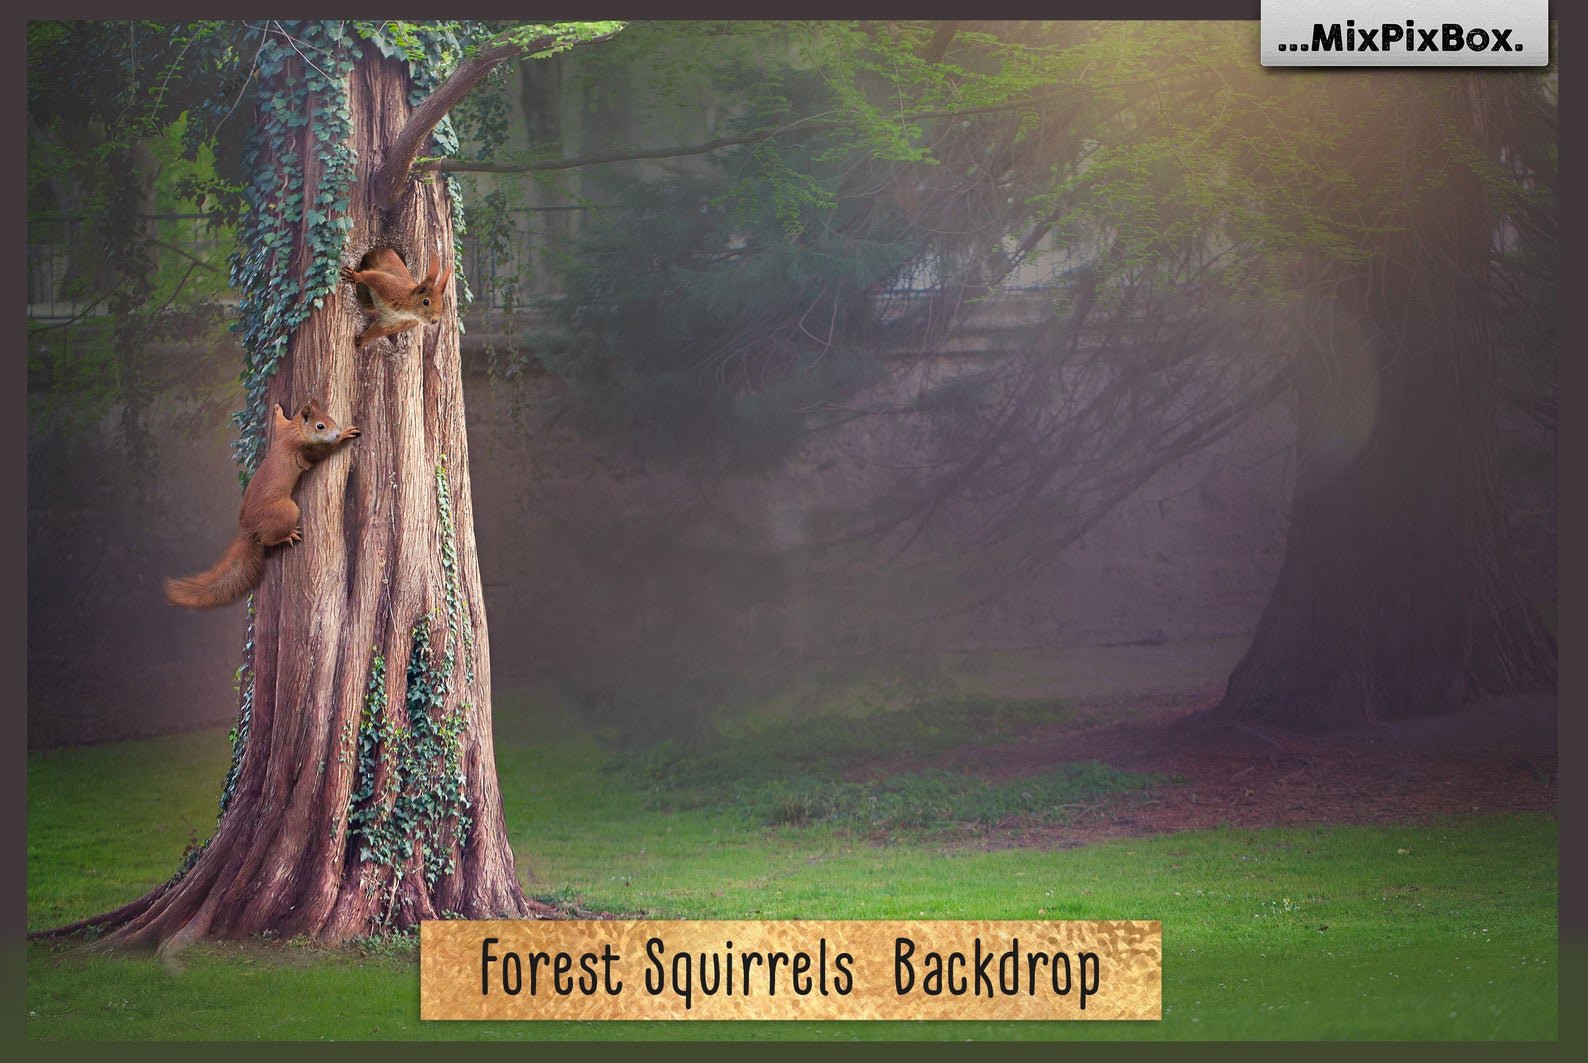 Forest Squirrels Backdropcover image.